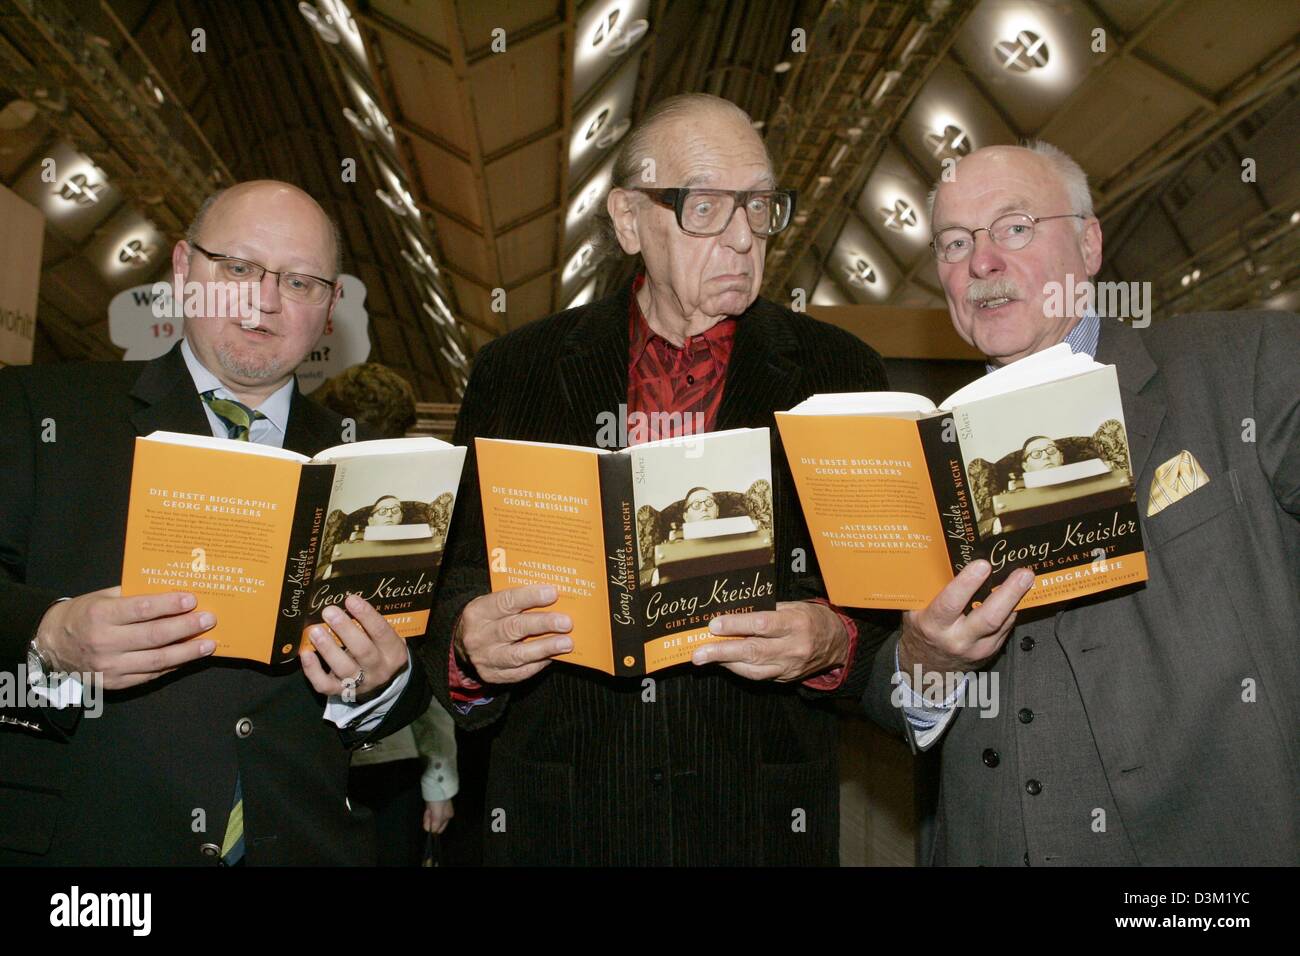 (dpa) - Together with Austrian satirist, chanson singer and cabaret artist Georg Kreisler (C) the authors Hans-Juergen Fink (L) and Michael Seufert (R) present the biography 'Georg Kreisler does not exist' at the Frankfurt Book Fair in Frankfurt, Germany, 20 October 2005. Photo: Frank May Stock Photo